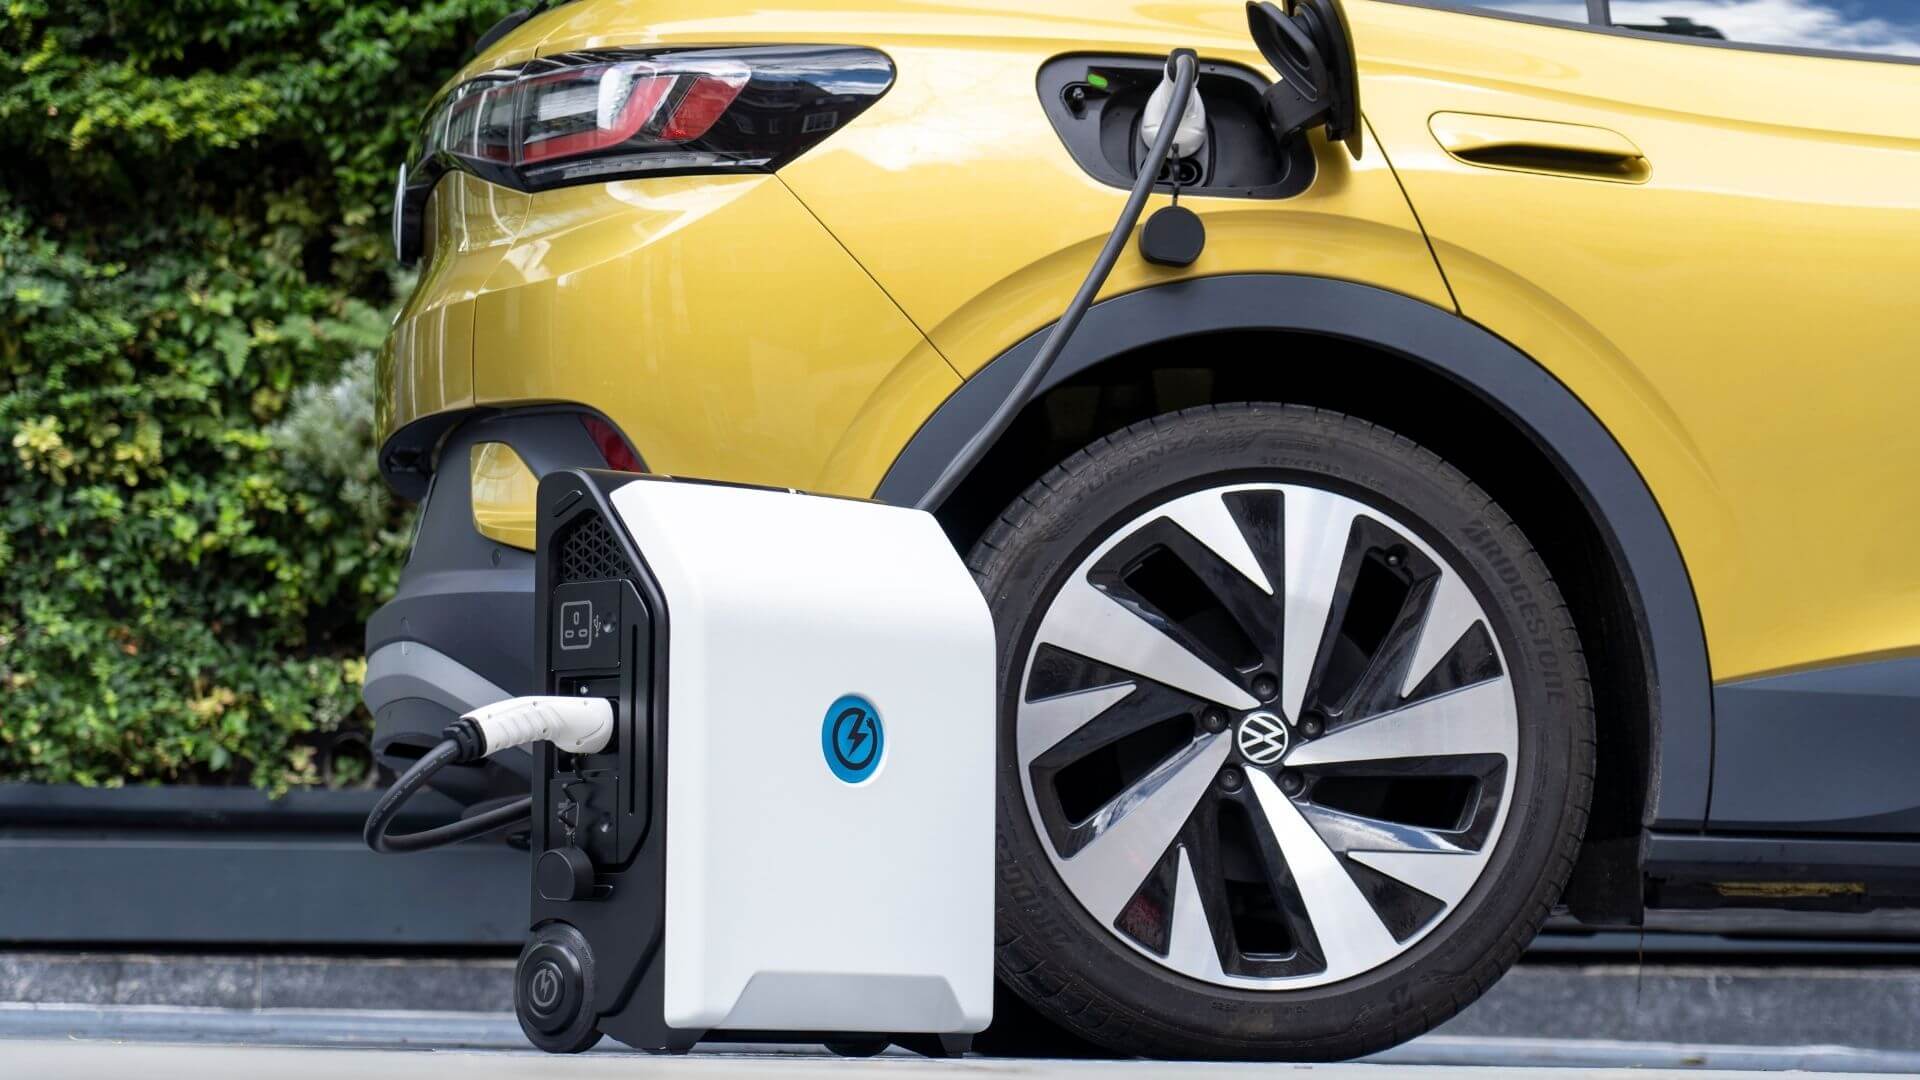 https://e-vehicleinfo.com/zipcharge-releases-its-new-portable-ev-charger-ahead-of-launch/